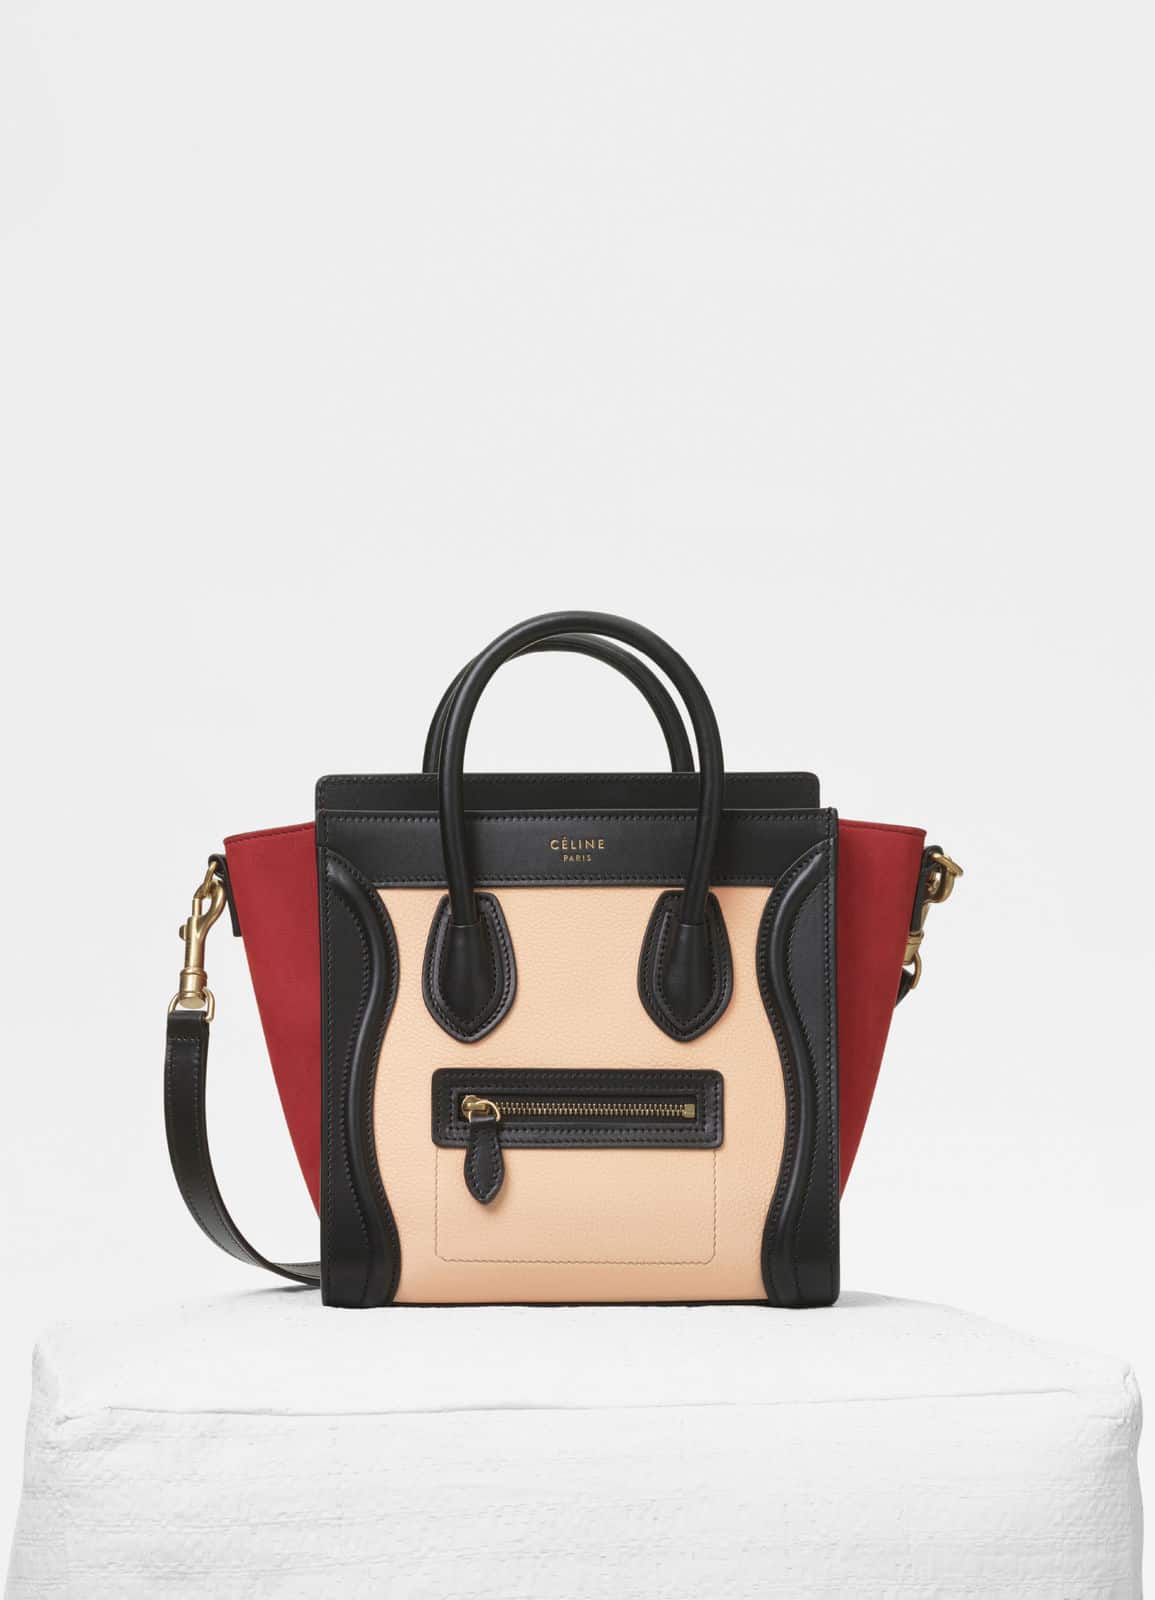 Celine Spring 2018 Bag Collection Featuring the Big Bucket | Spotted Fashion